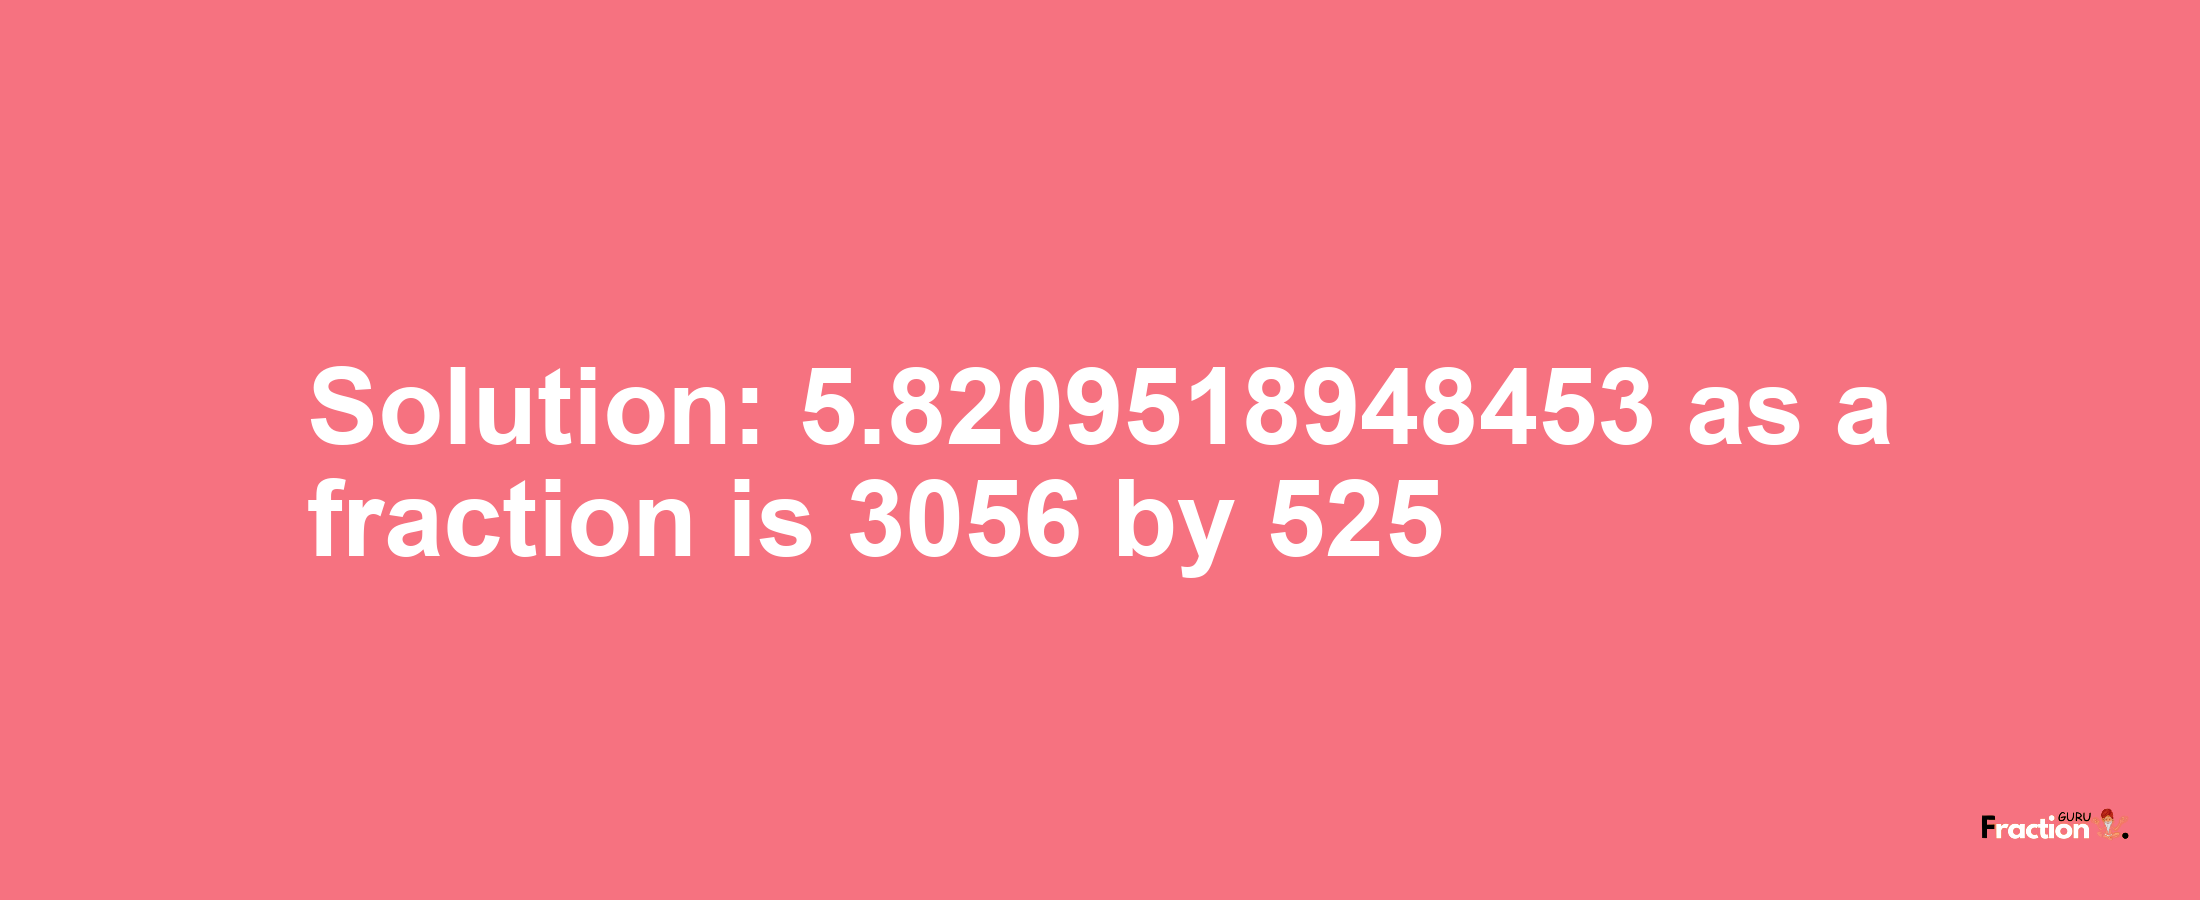 Solution:5.8209518948453 as a fraction is 3056/525